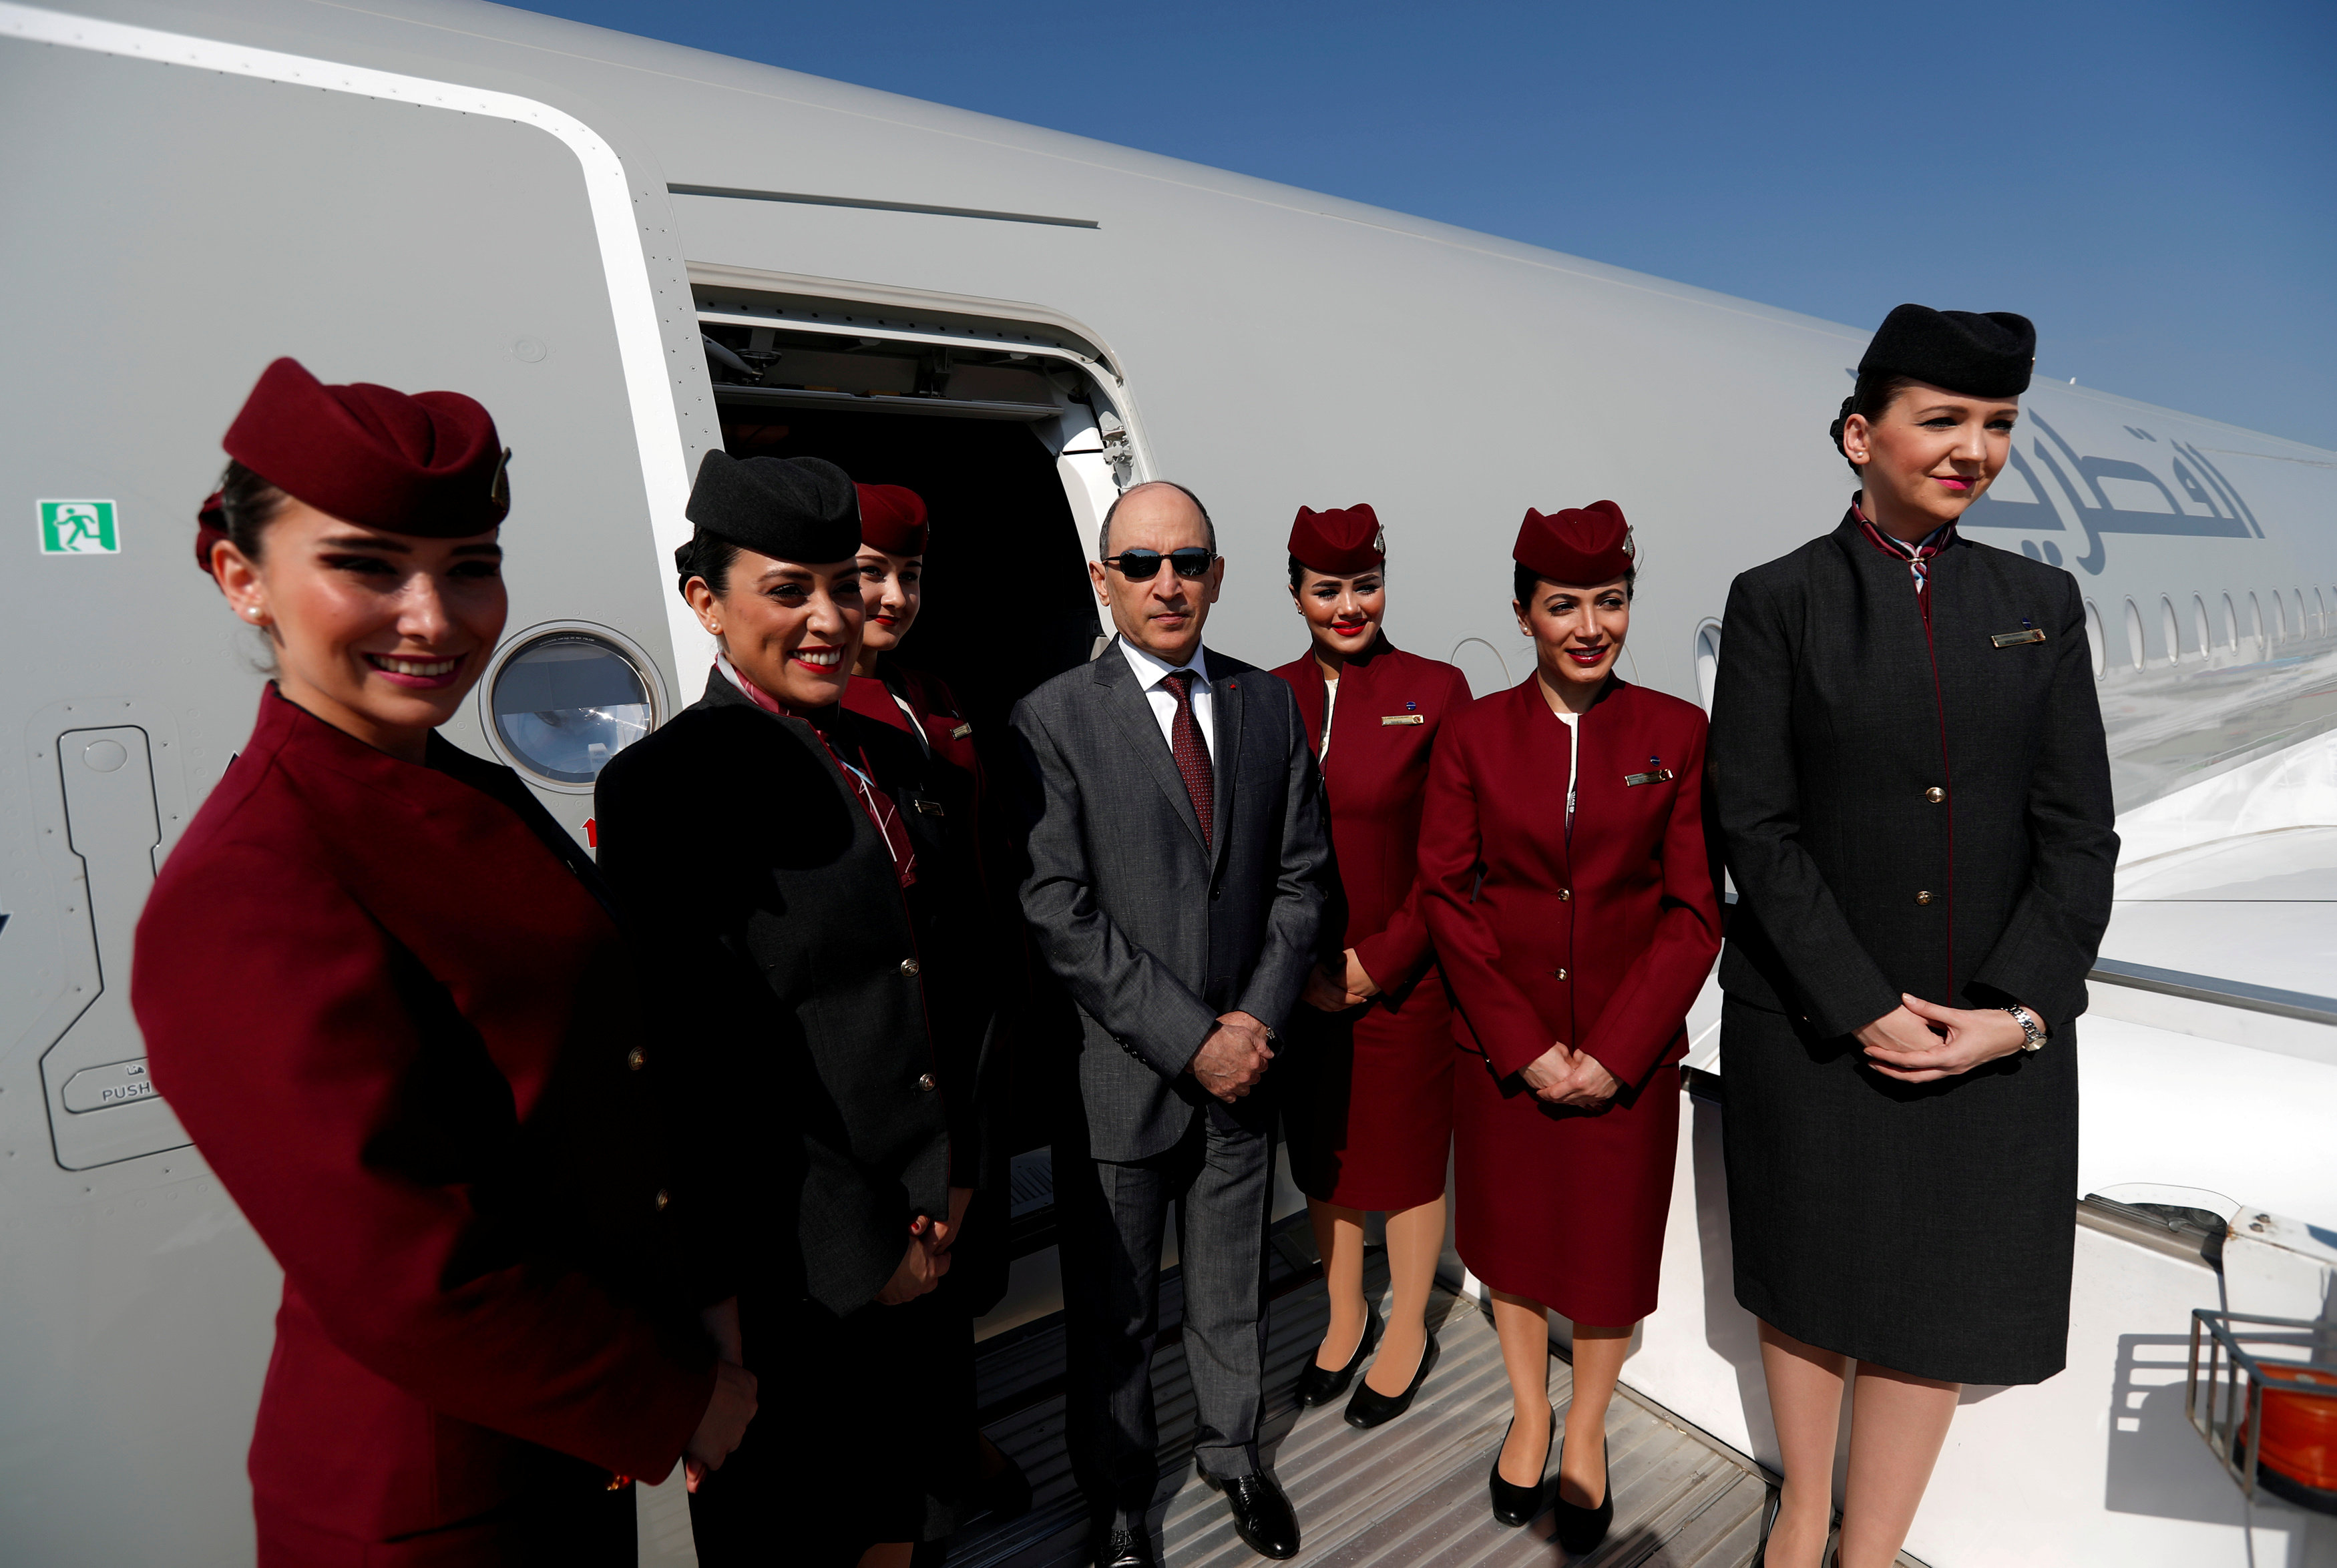 Qatar Airways boss apologizes for remarks on women CEOs